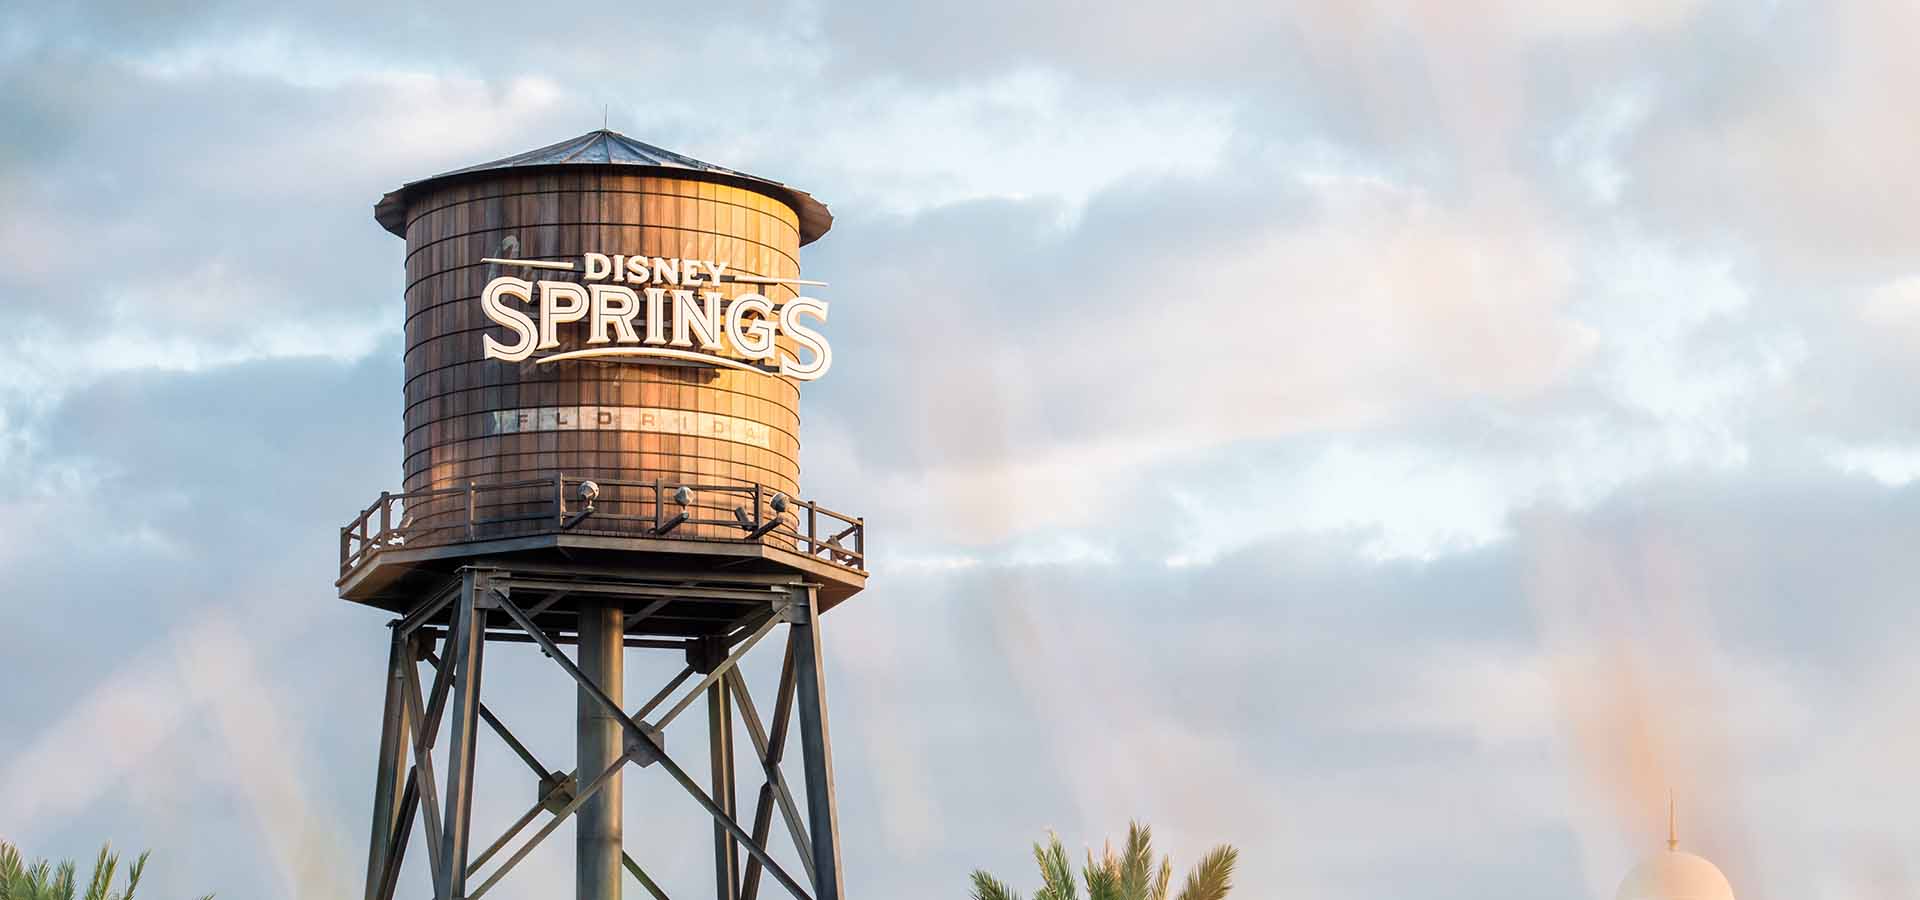 View of the Disney Springs water tower